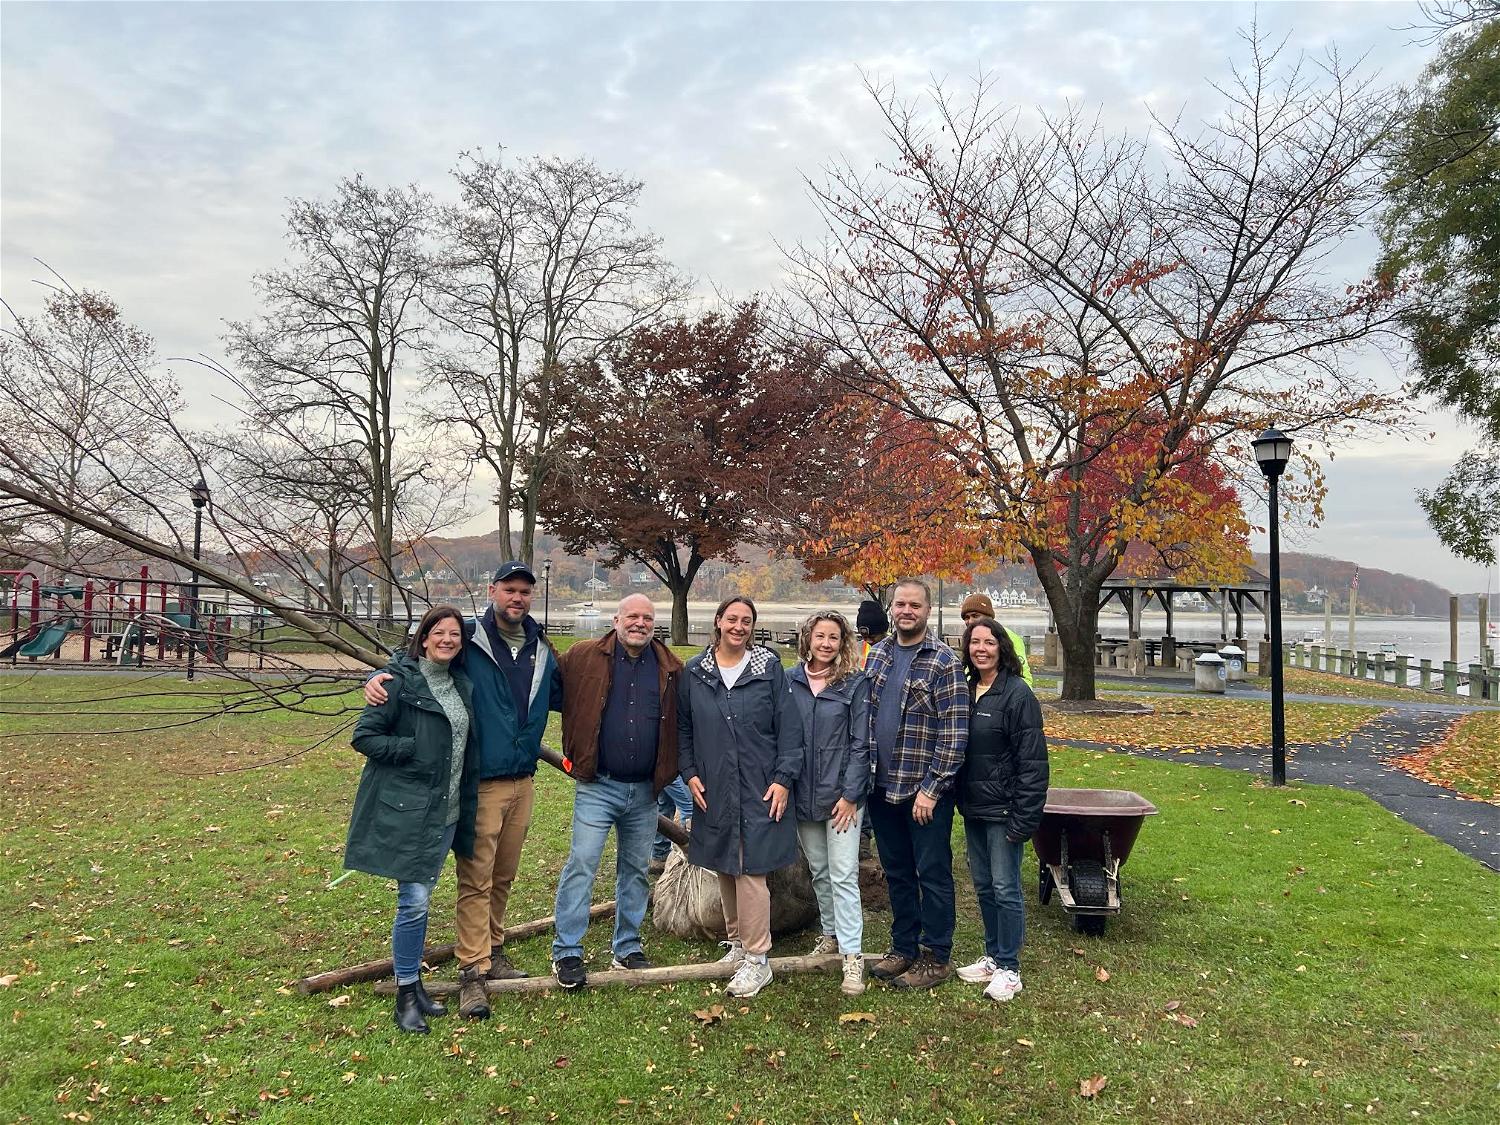 From left: Nicole Tamaro, Jon Holden, Roland Buzard, Meghan Dolan, Sara Abbass, Matt Gorman and Barbara Bolen. Also present but not photographed were Northport Village Mayor Donna Koch, Trustee Dave Weber, and Robb Smith from the NYS Department of Transportation. Two native red maple trees donated by NNGI and Steven Dubner Landscaping were planted in Cow Harbor Park in Northport Village this past Saturday, November 18.